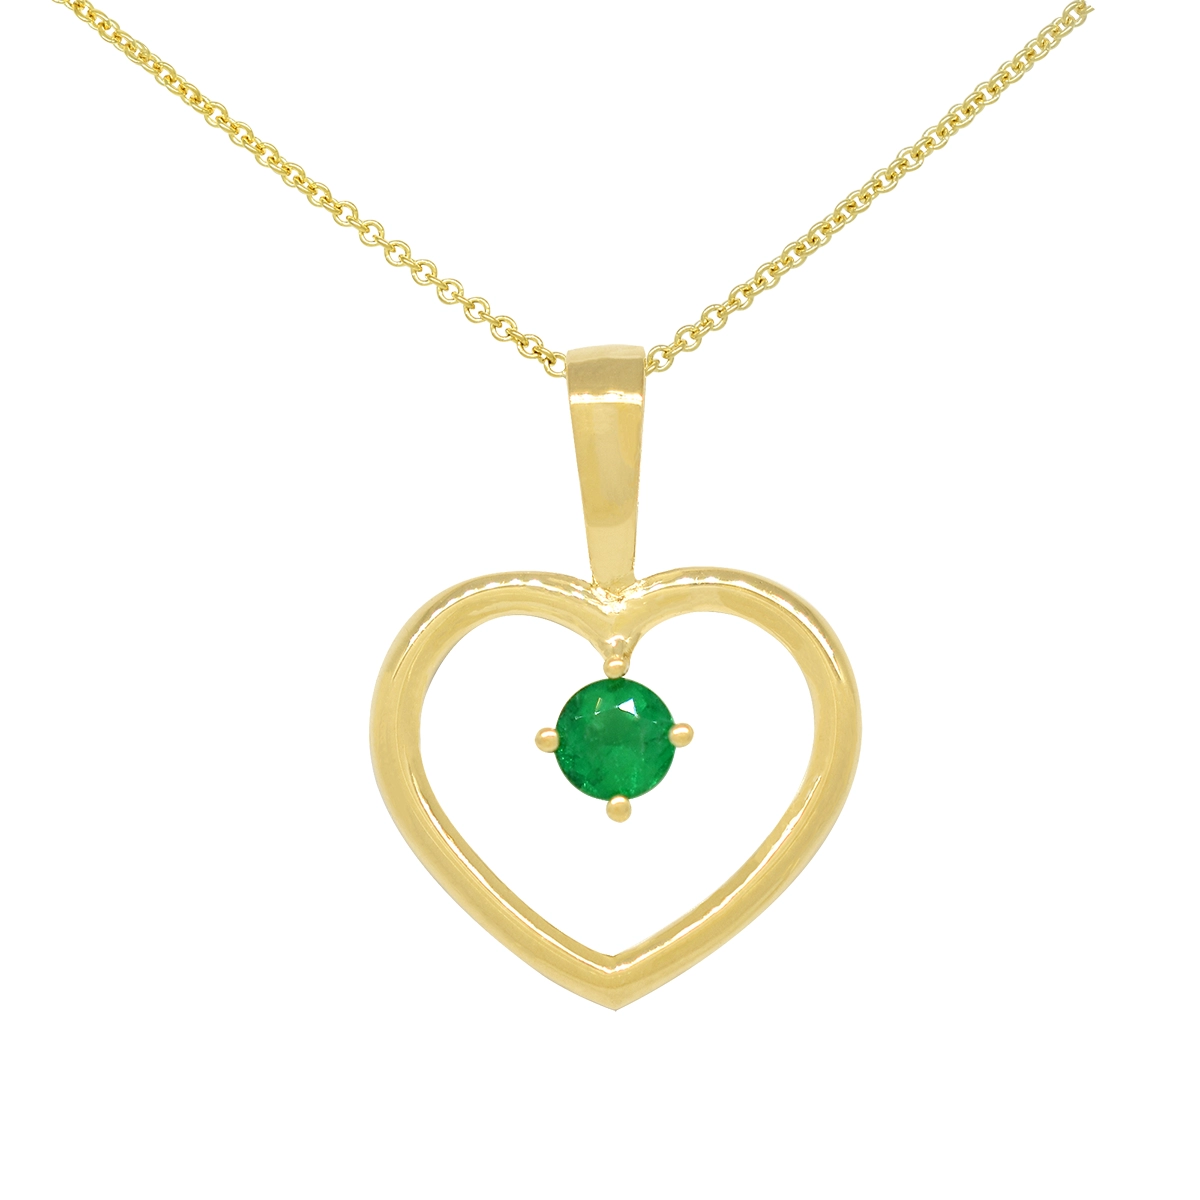 Heart-shaped emerald pendant necklace in 18K gold with small round cut emerald in 0.22 Ct. weight set in the center